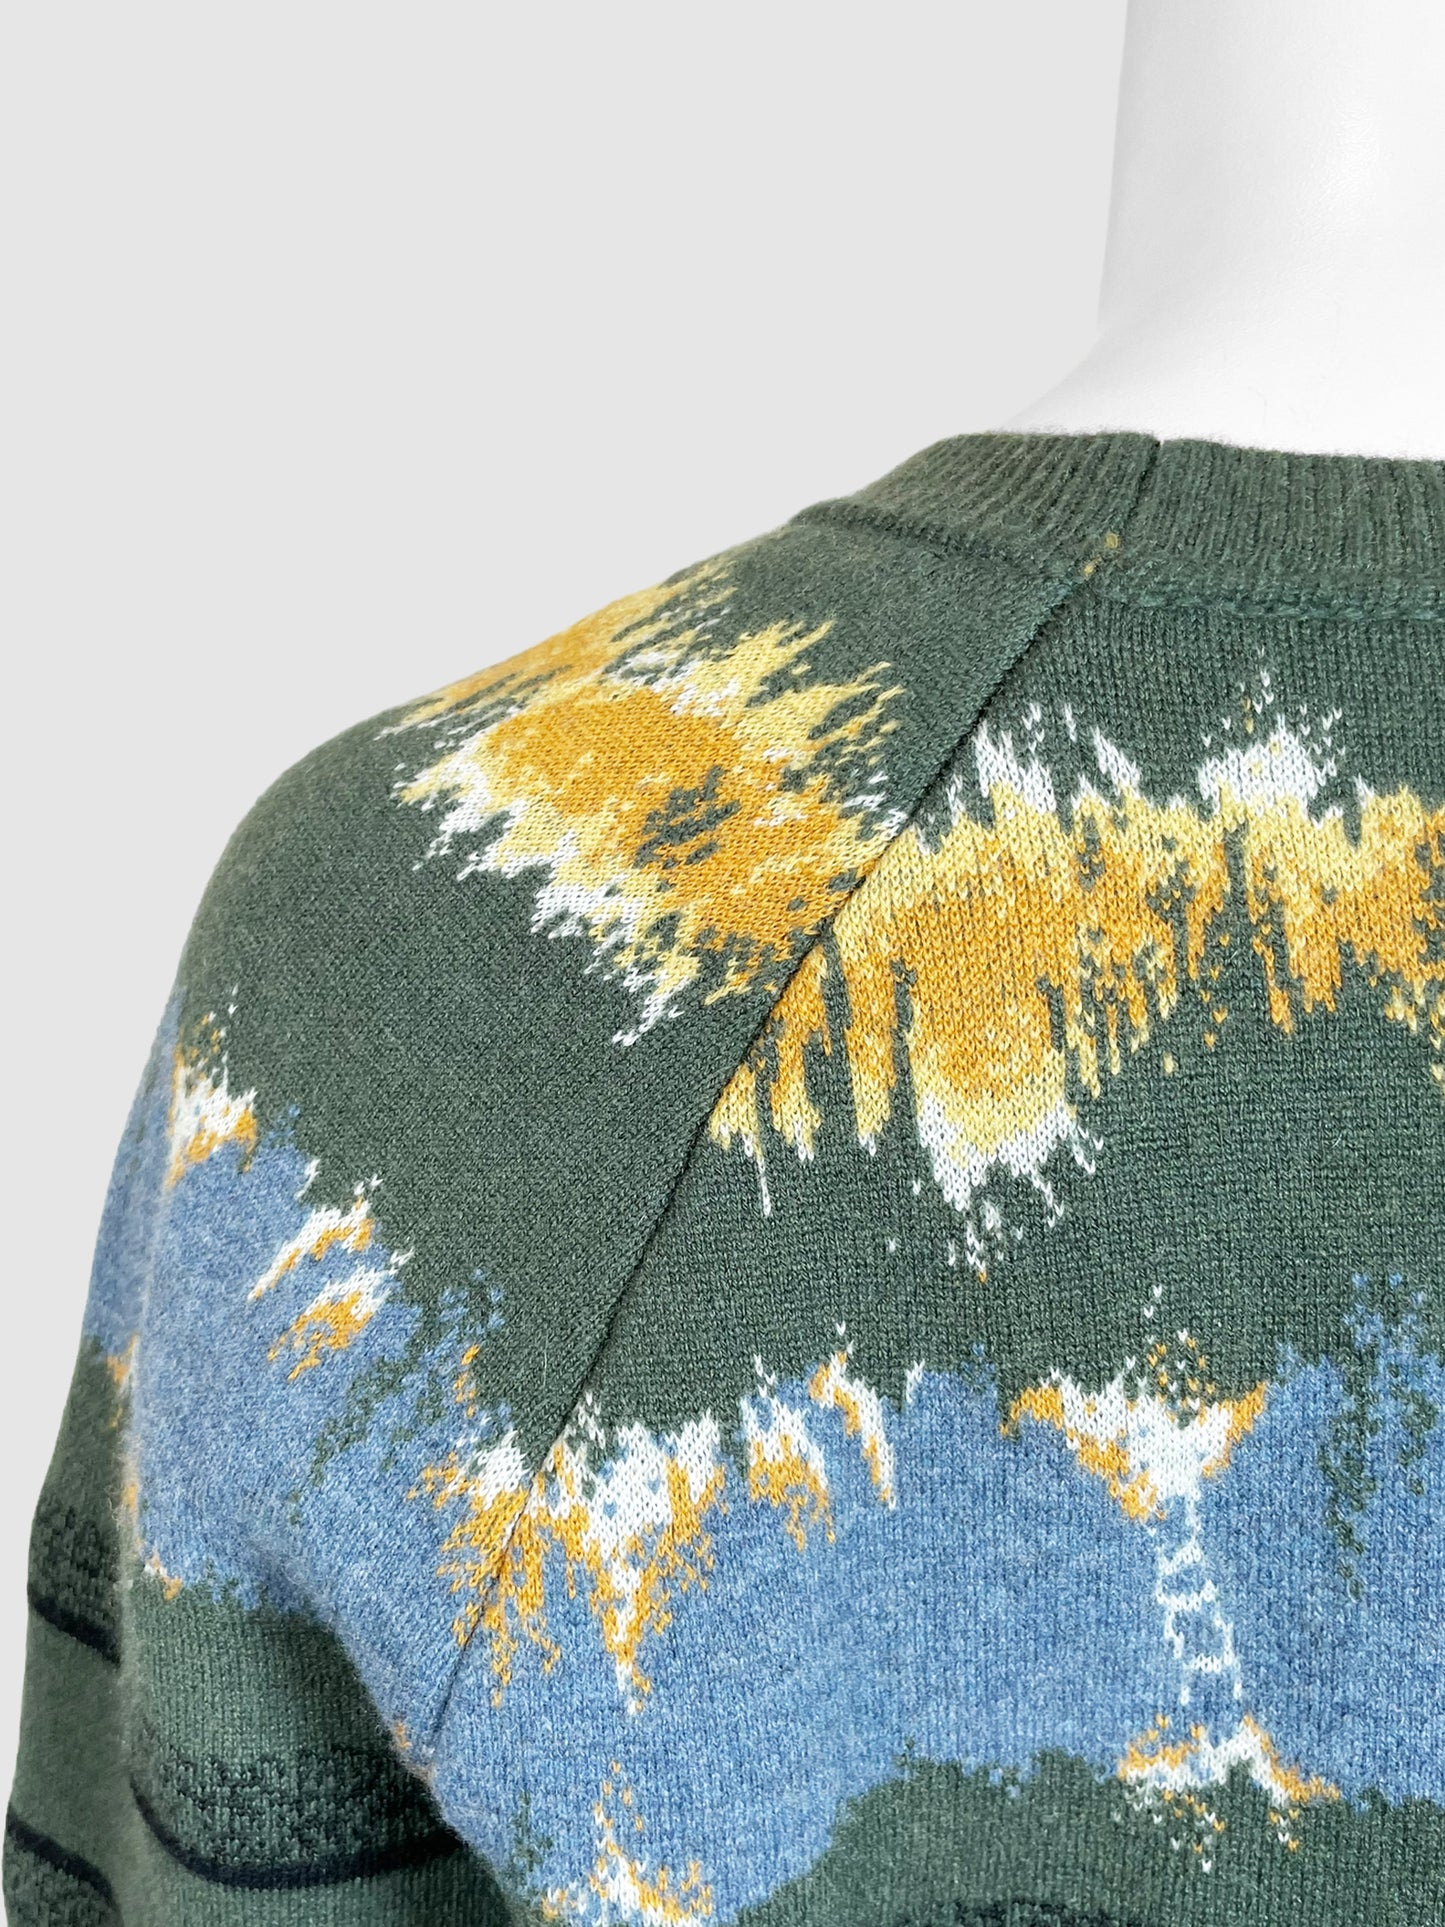 Christian Dior Abstract Print Sweater - Size 2